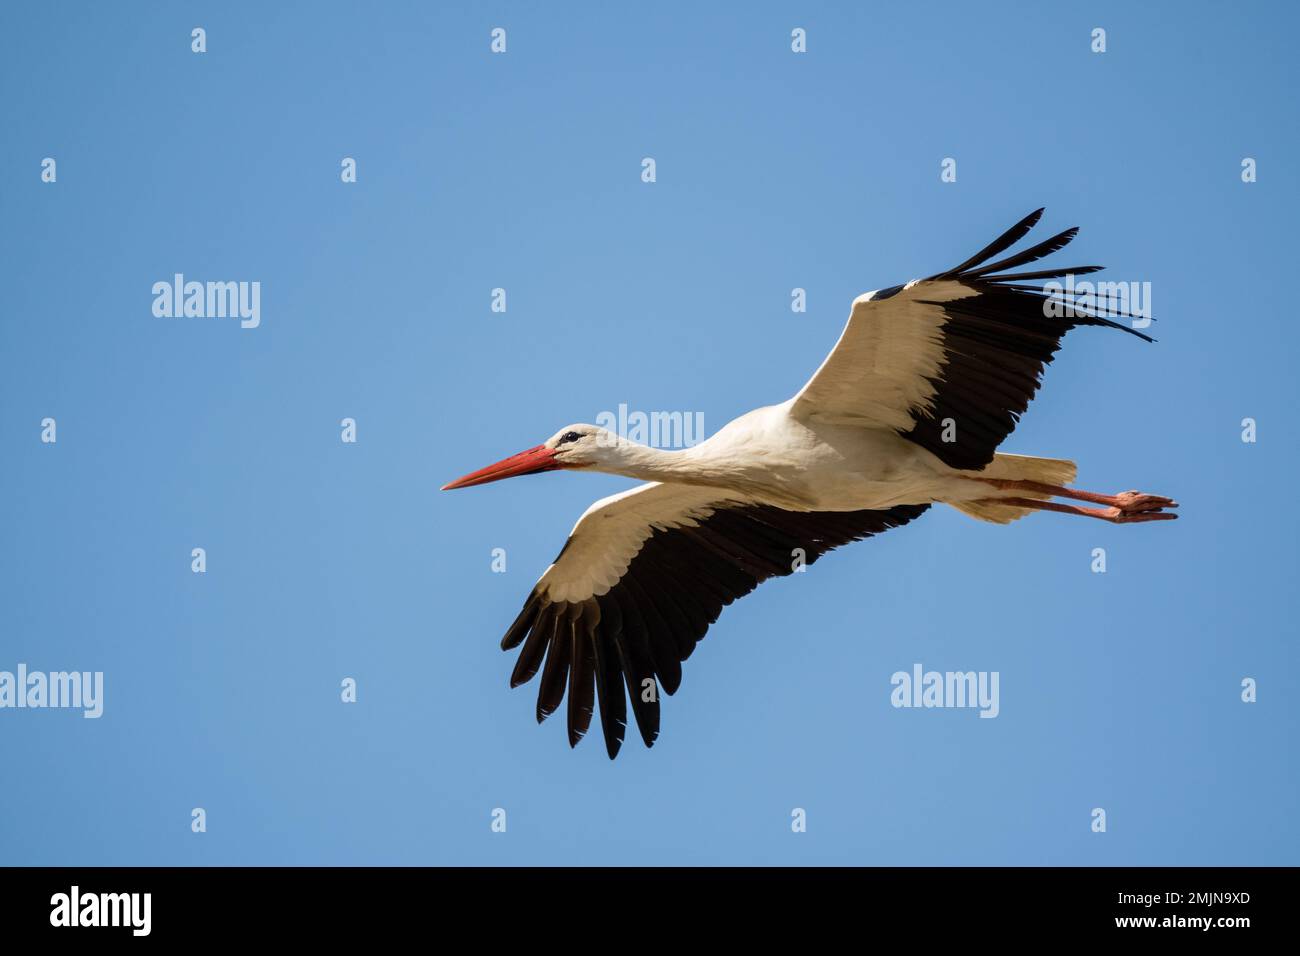 white stork, Ciconia ciconia, flying on a blue sky. Catalonia, Spain Stock Photo